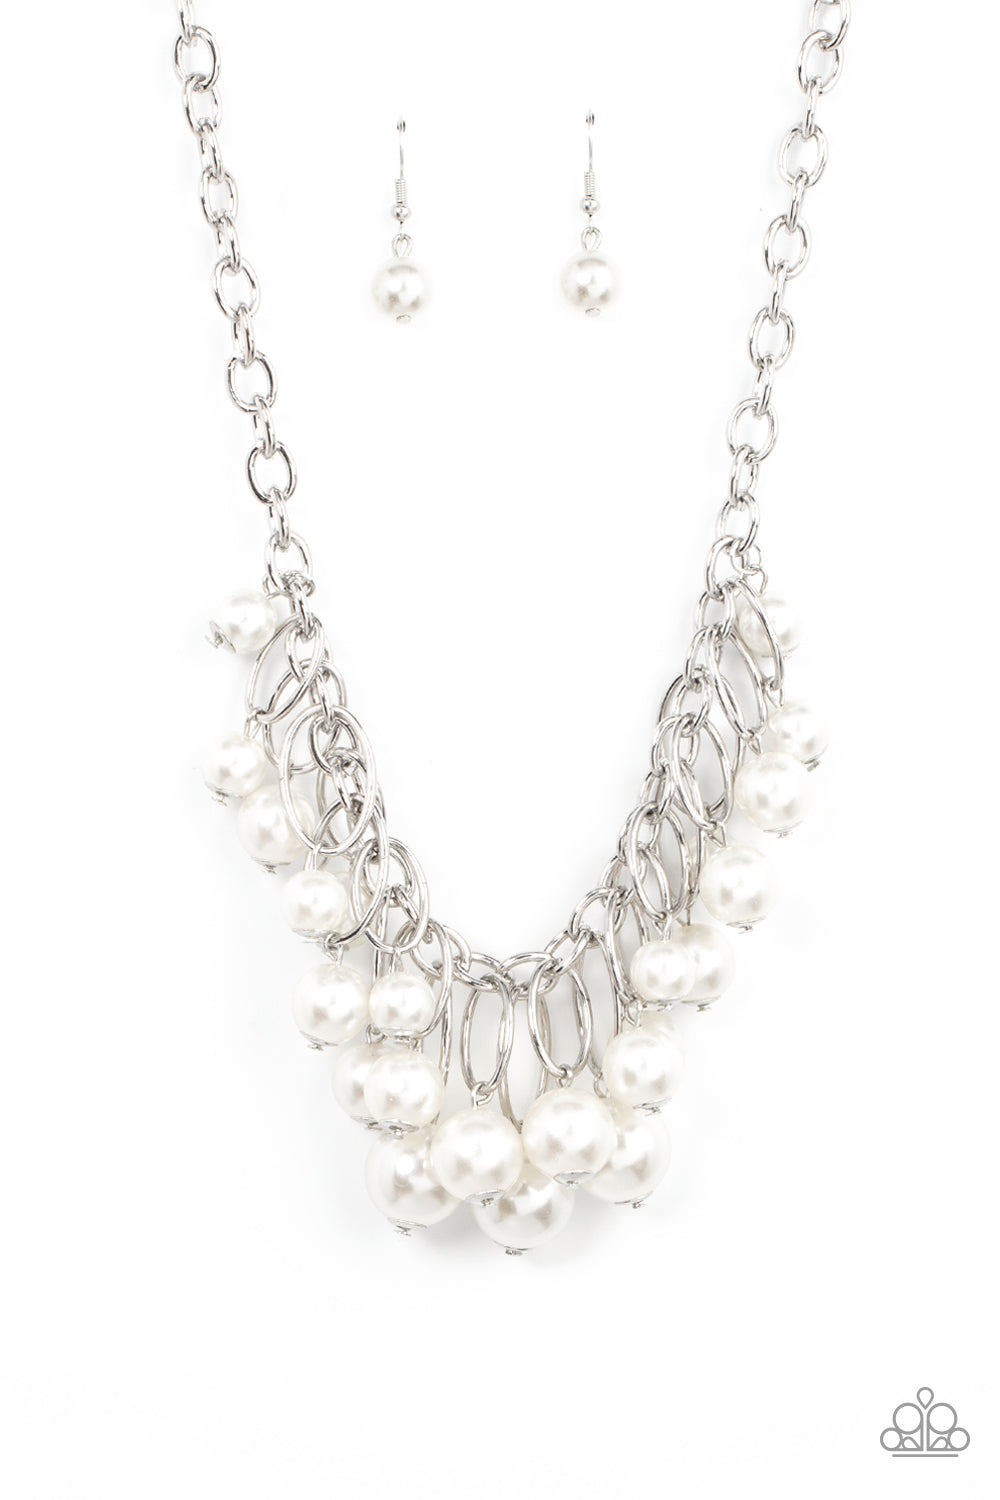 Powerhouse Pose - White Pearl Life of the Party Necklaces oversized white pearls dance from the bottoms of shiny silver ovals that delicately cluster along a chunky silver chain, resulting in a luxurious fringe below the collar. Features an adjustable clasp closure.  Sold as one individual necklace. Includes one pair of matching earrings.